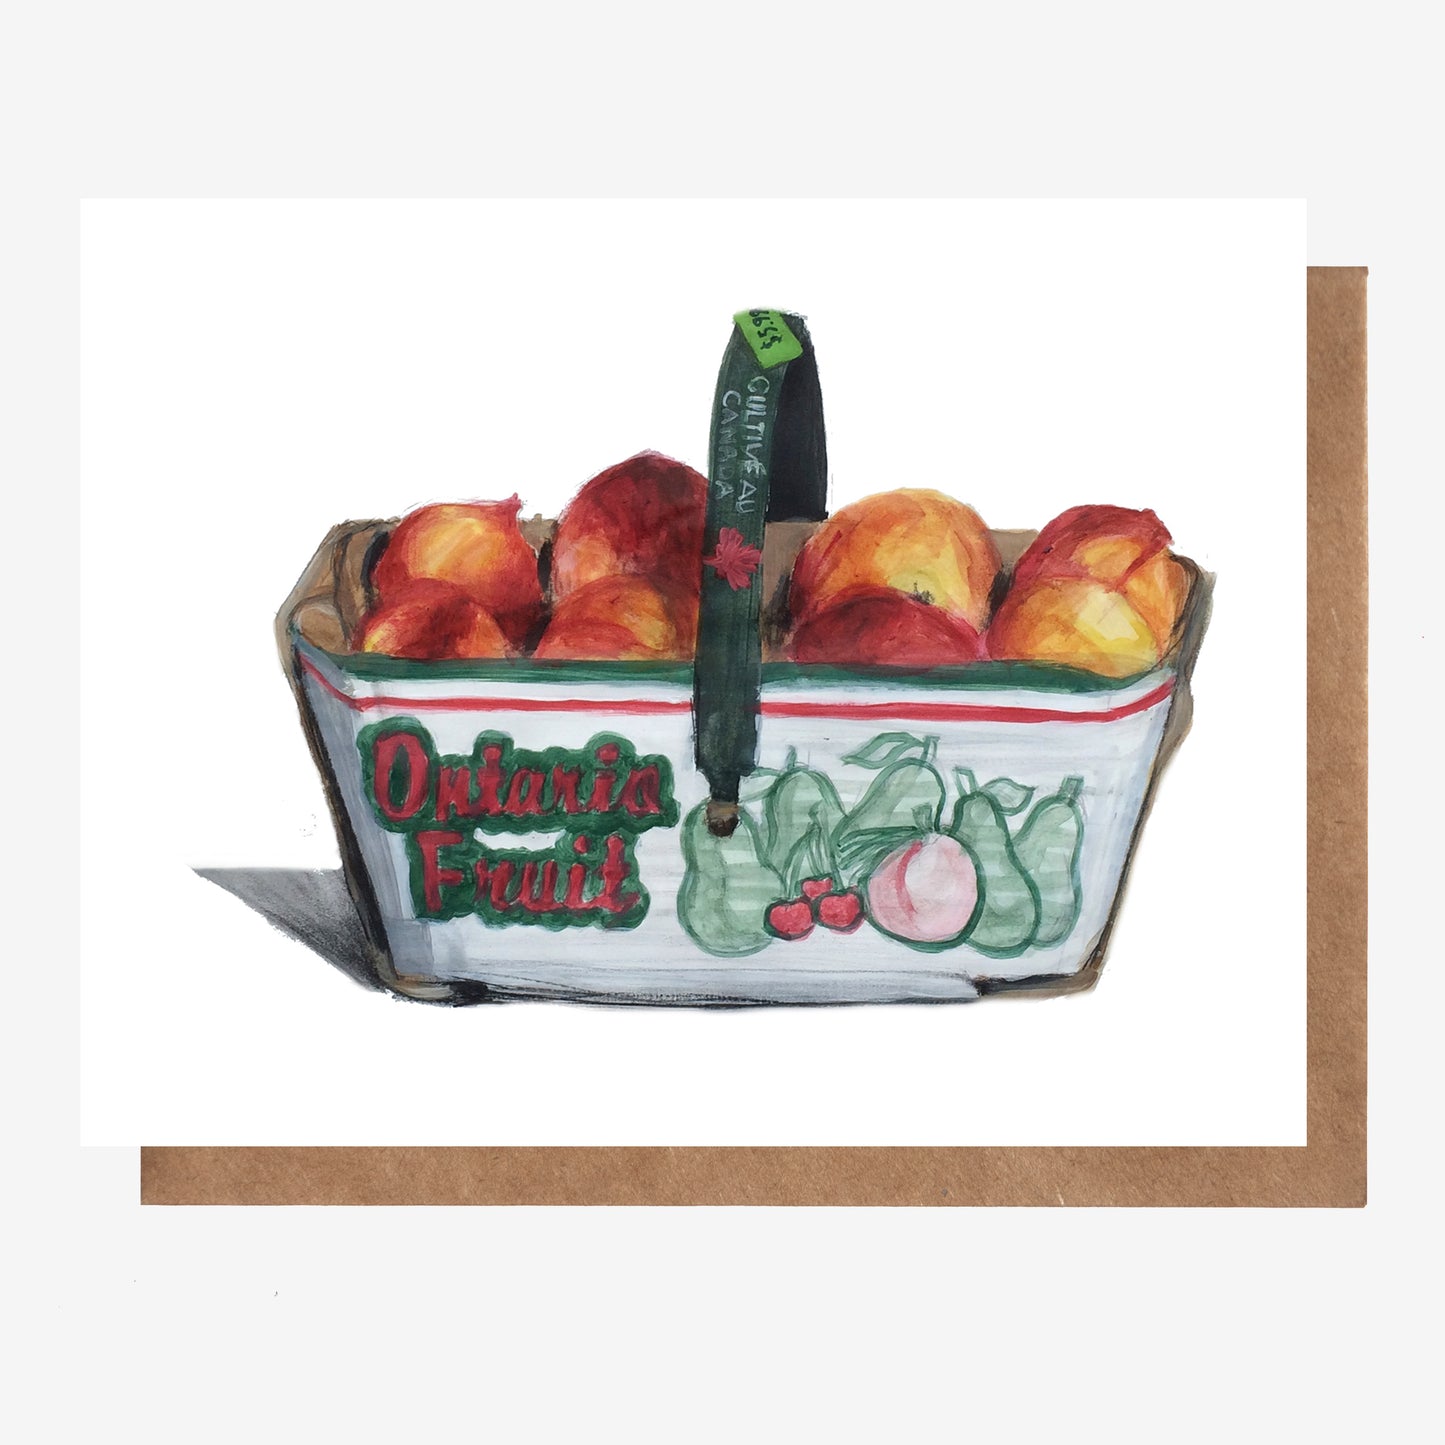 This best-selling all occasion card features a hand-drawn image of a box of juicy Ontario peaches. Made in Nova Scotia, Canada by Coastal Card Co.